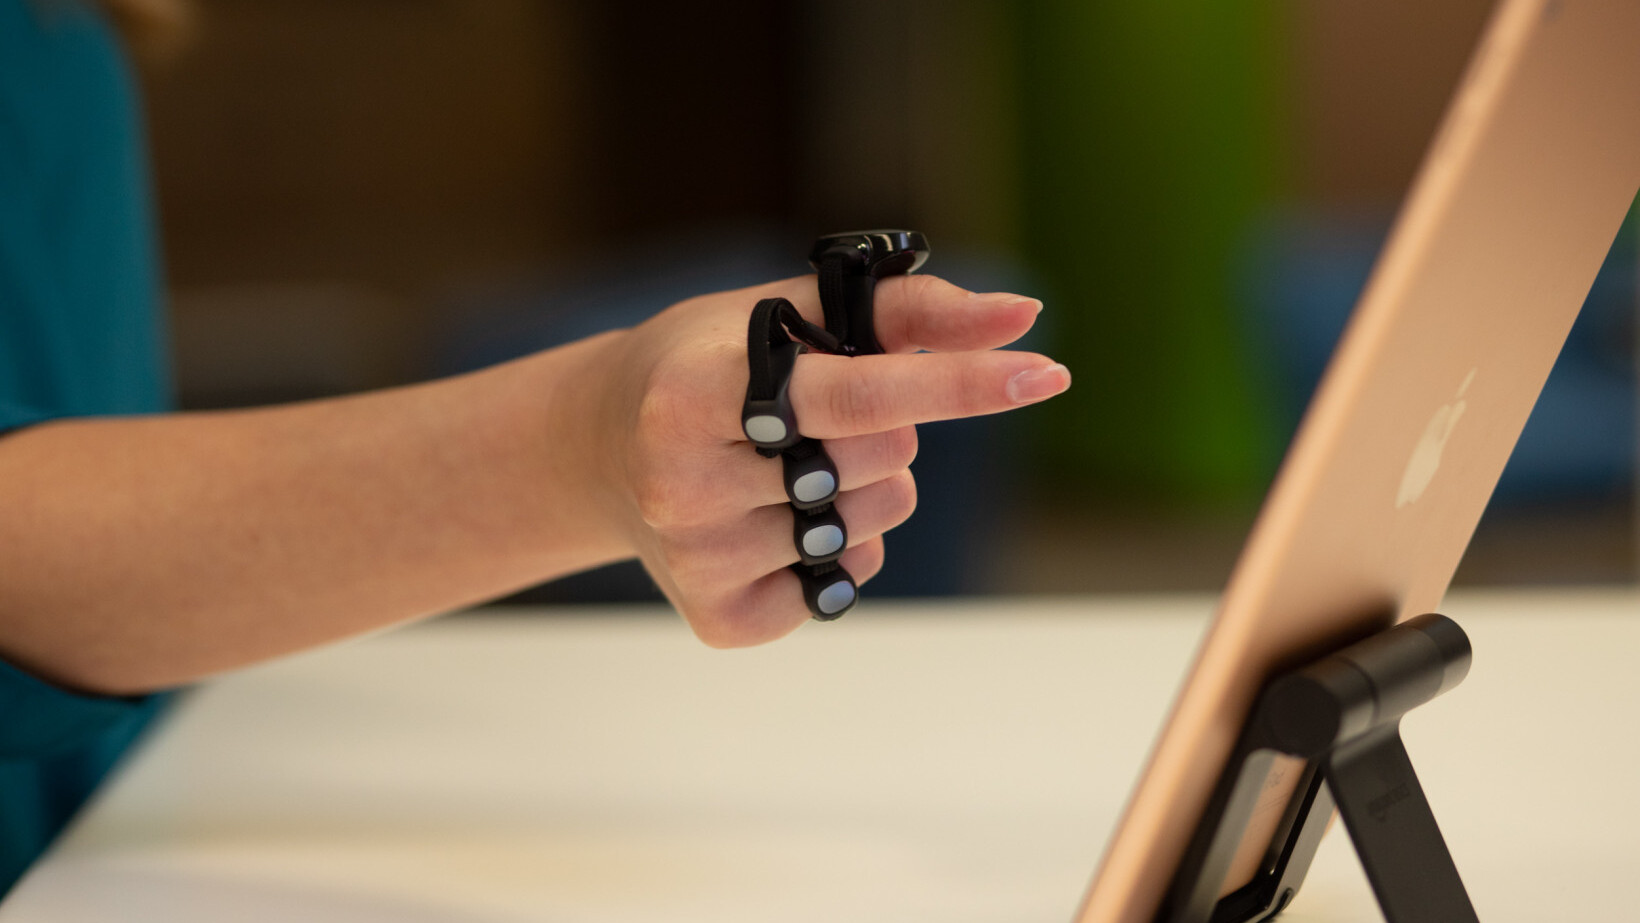 The Tap Strap wearable keyboard gets better with airmouse gestures